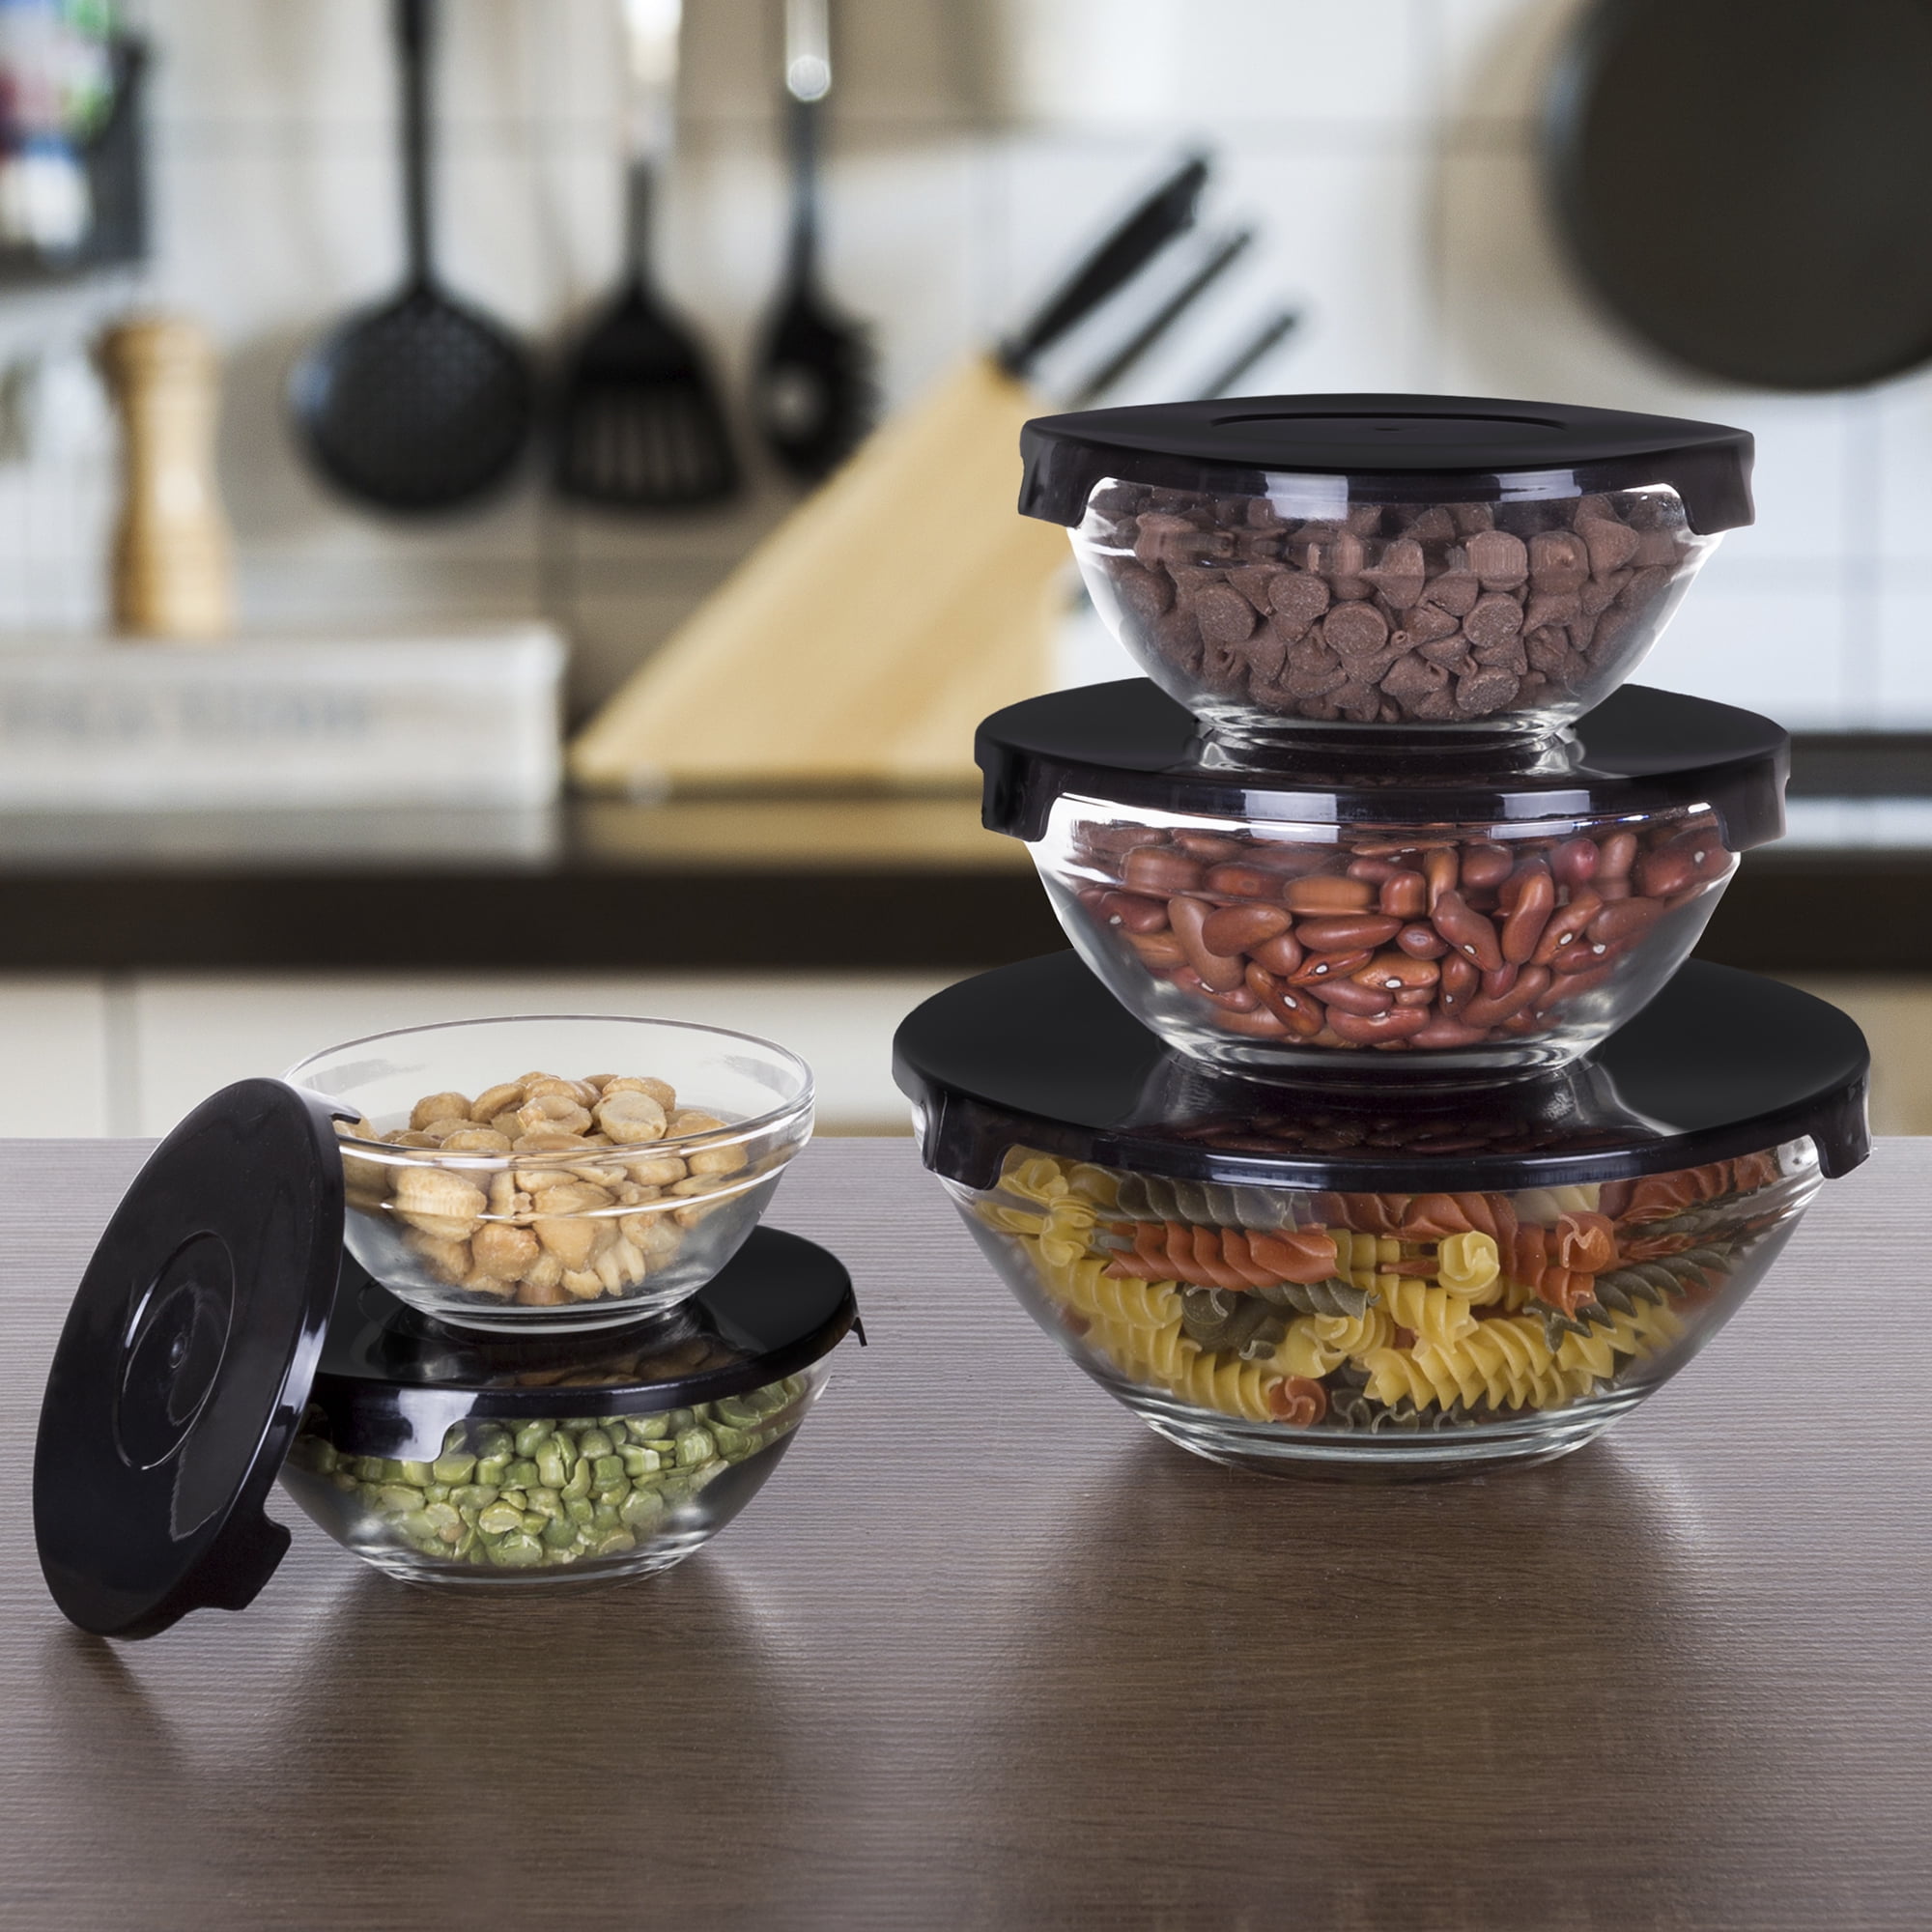 10-Pc Chef Buddy Glass Food Storage Containers with Snap Lids on sale for $12.95